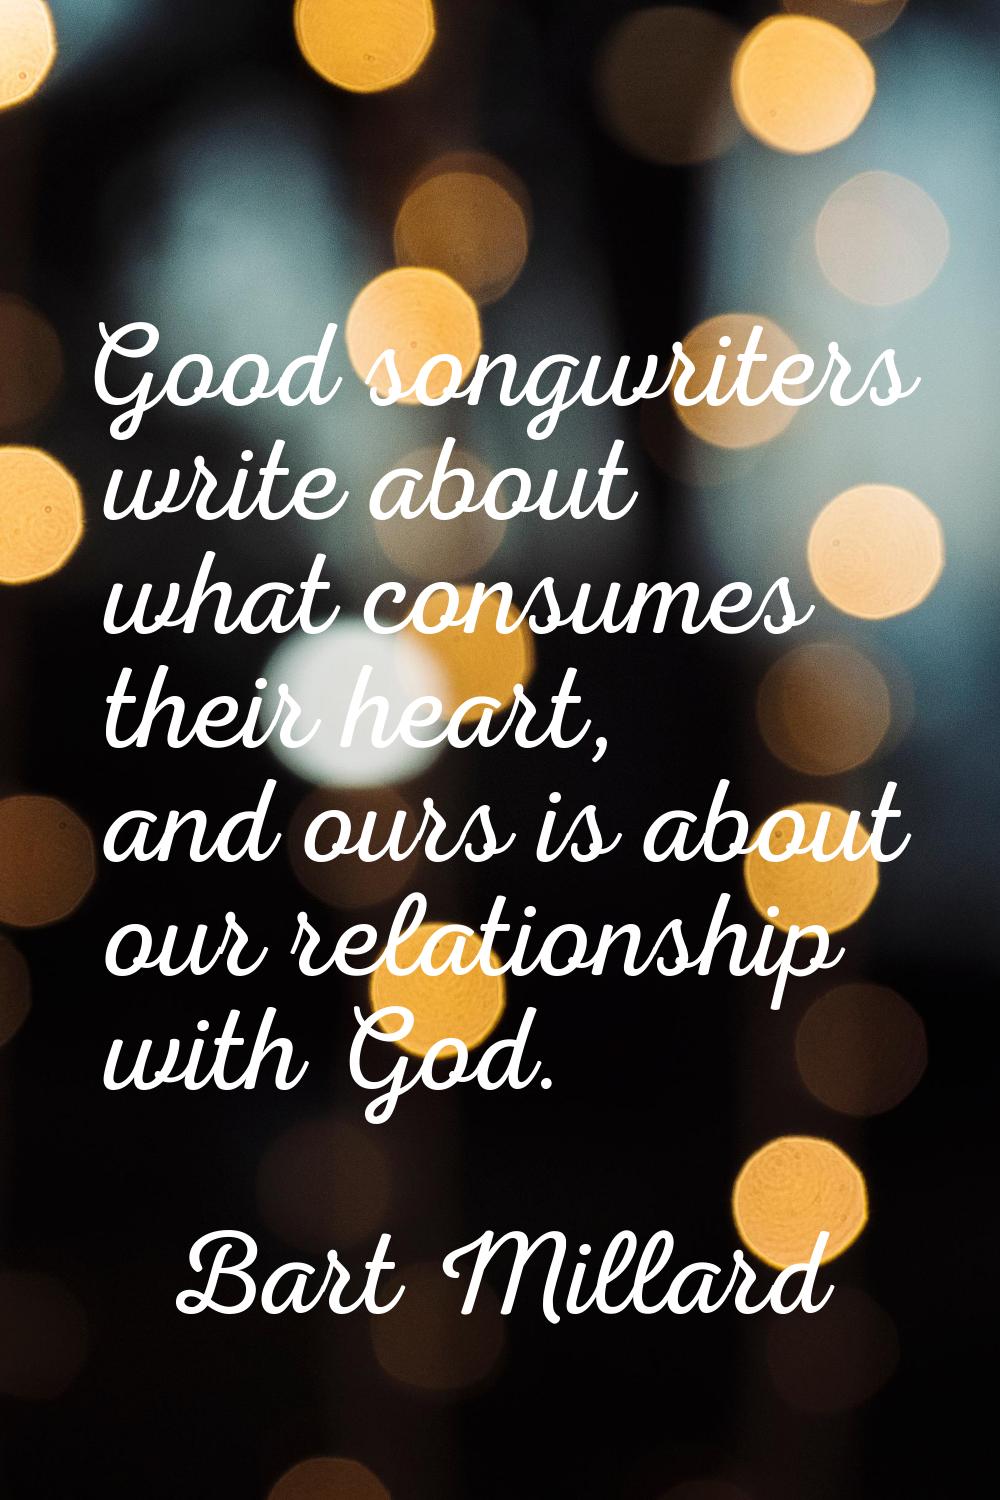 Good songwriters write about what consumes their heart, and ours is about our relationship with God